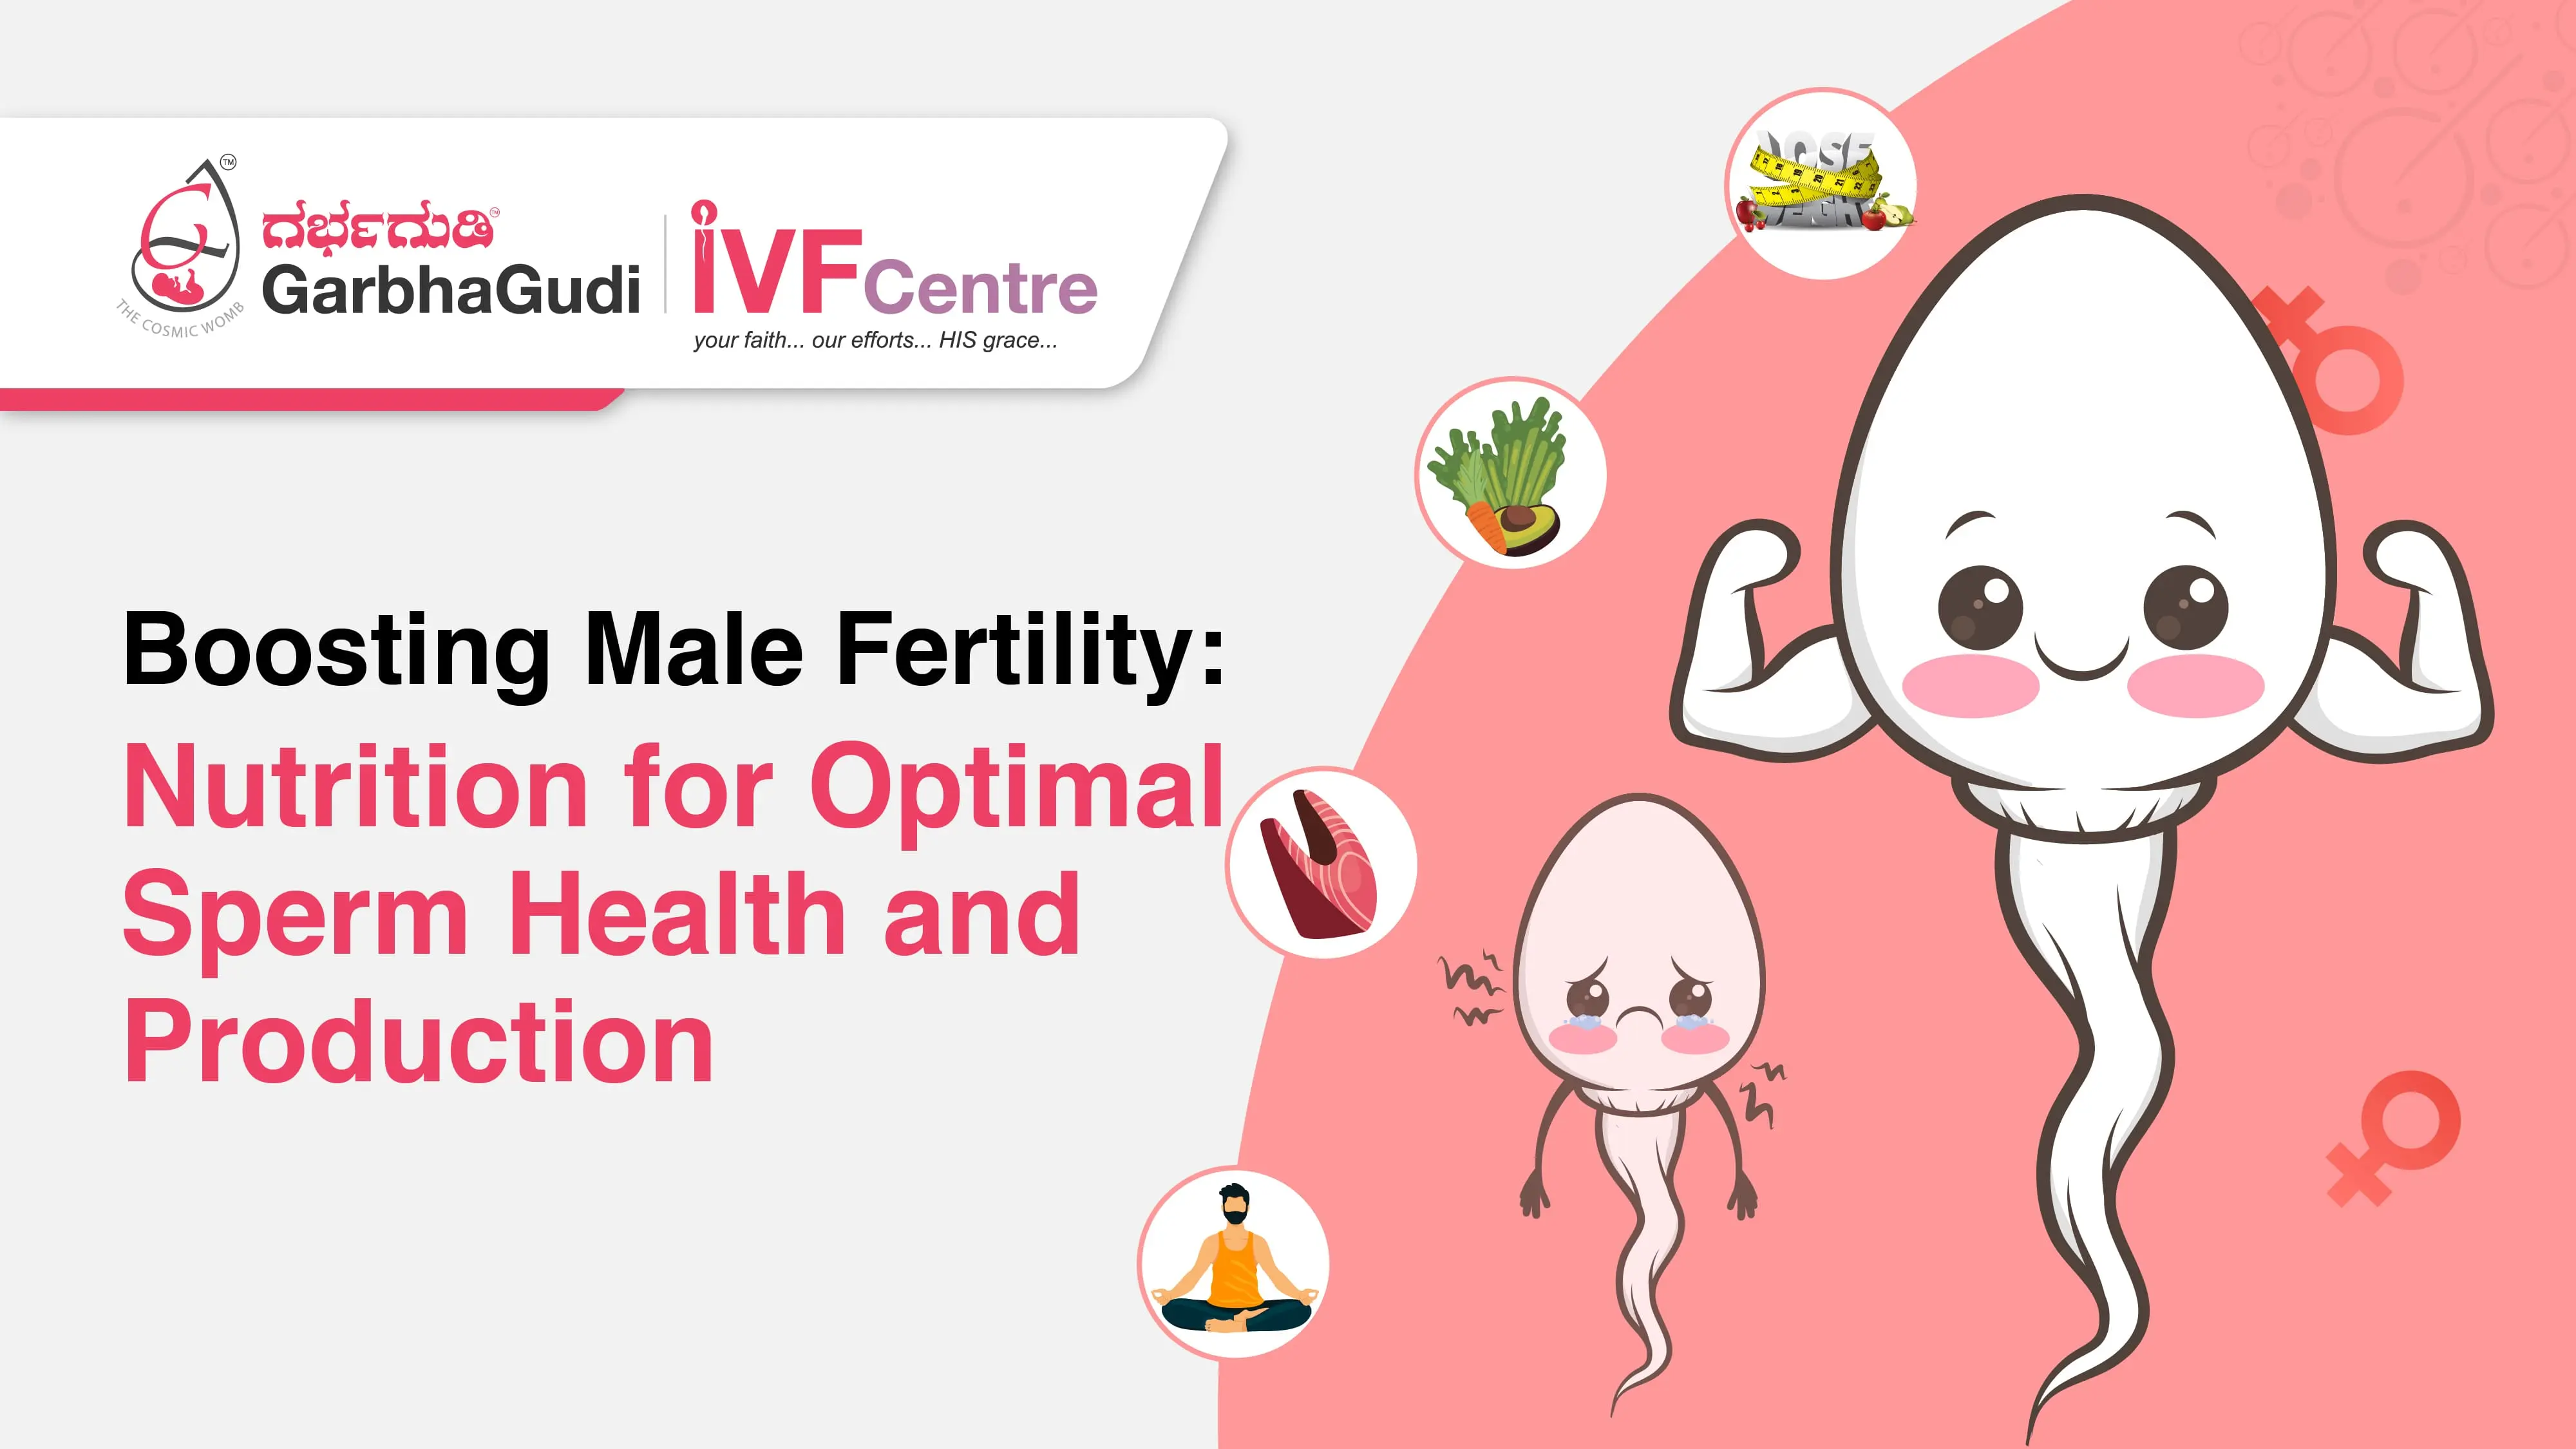 Boosting Male Fertility: Nutrition for Optimal Sperm Health and Production